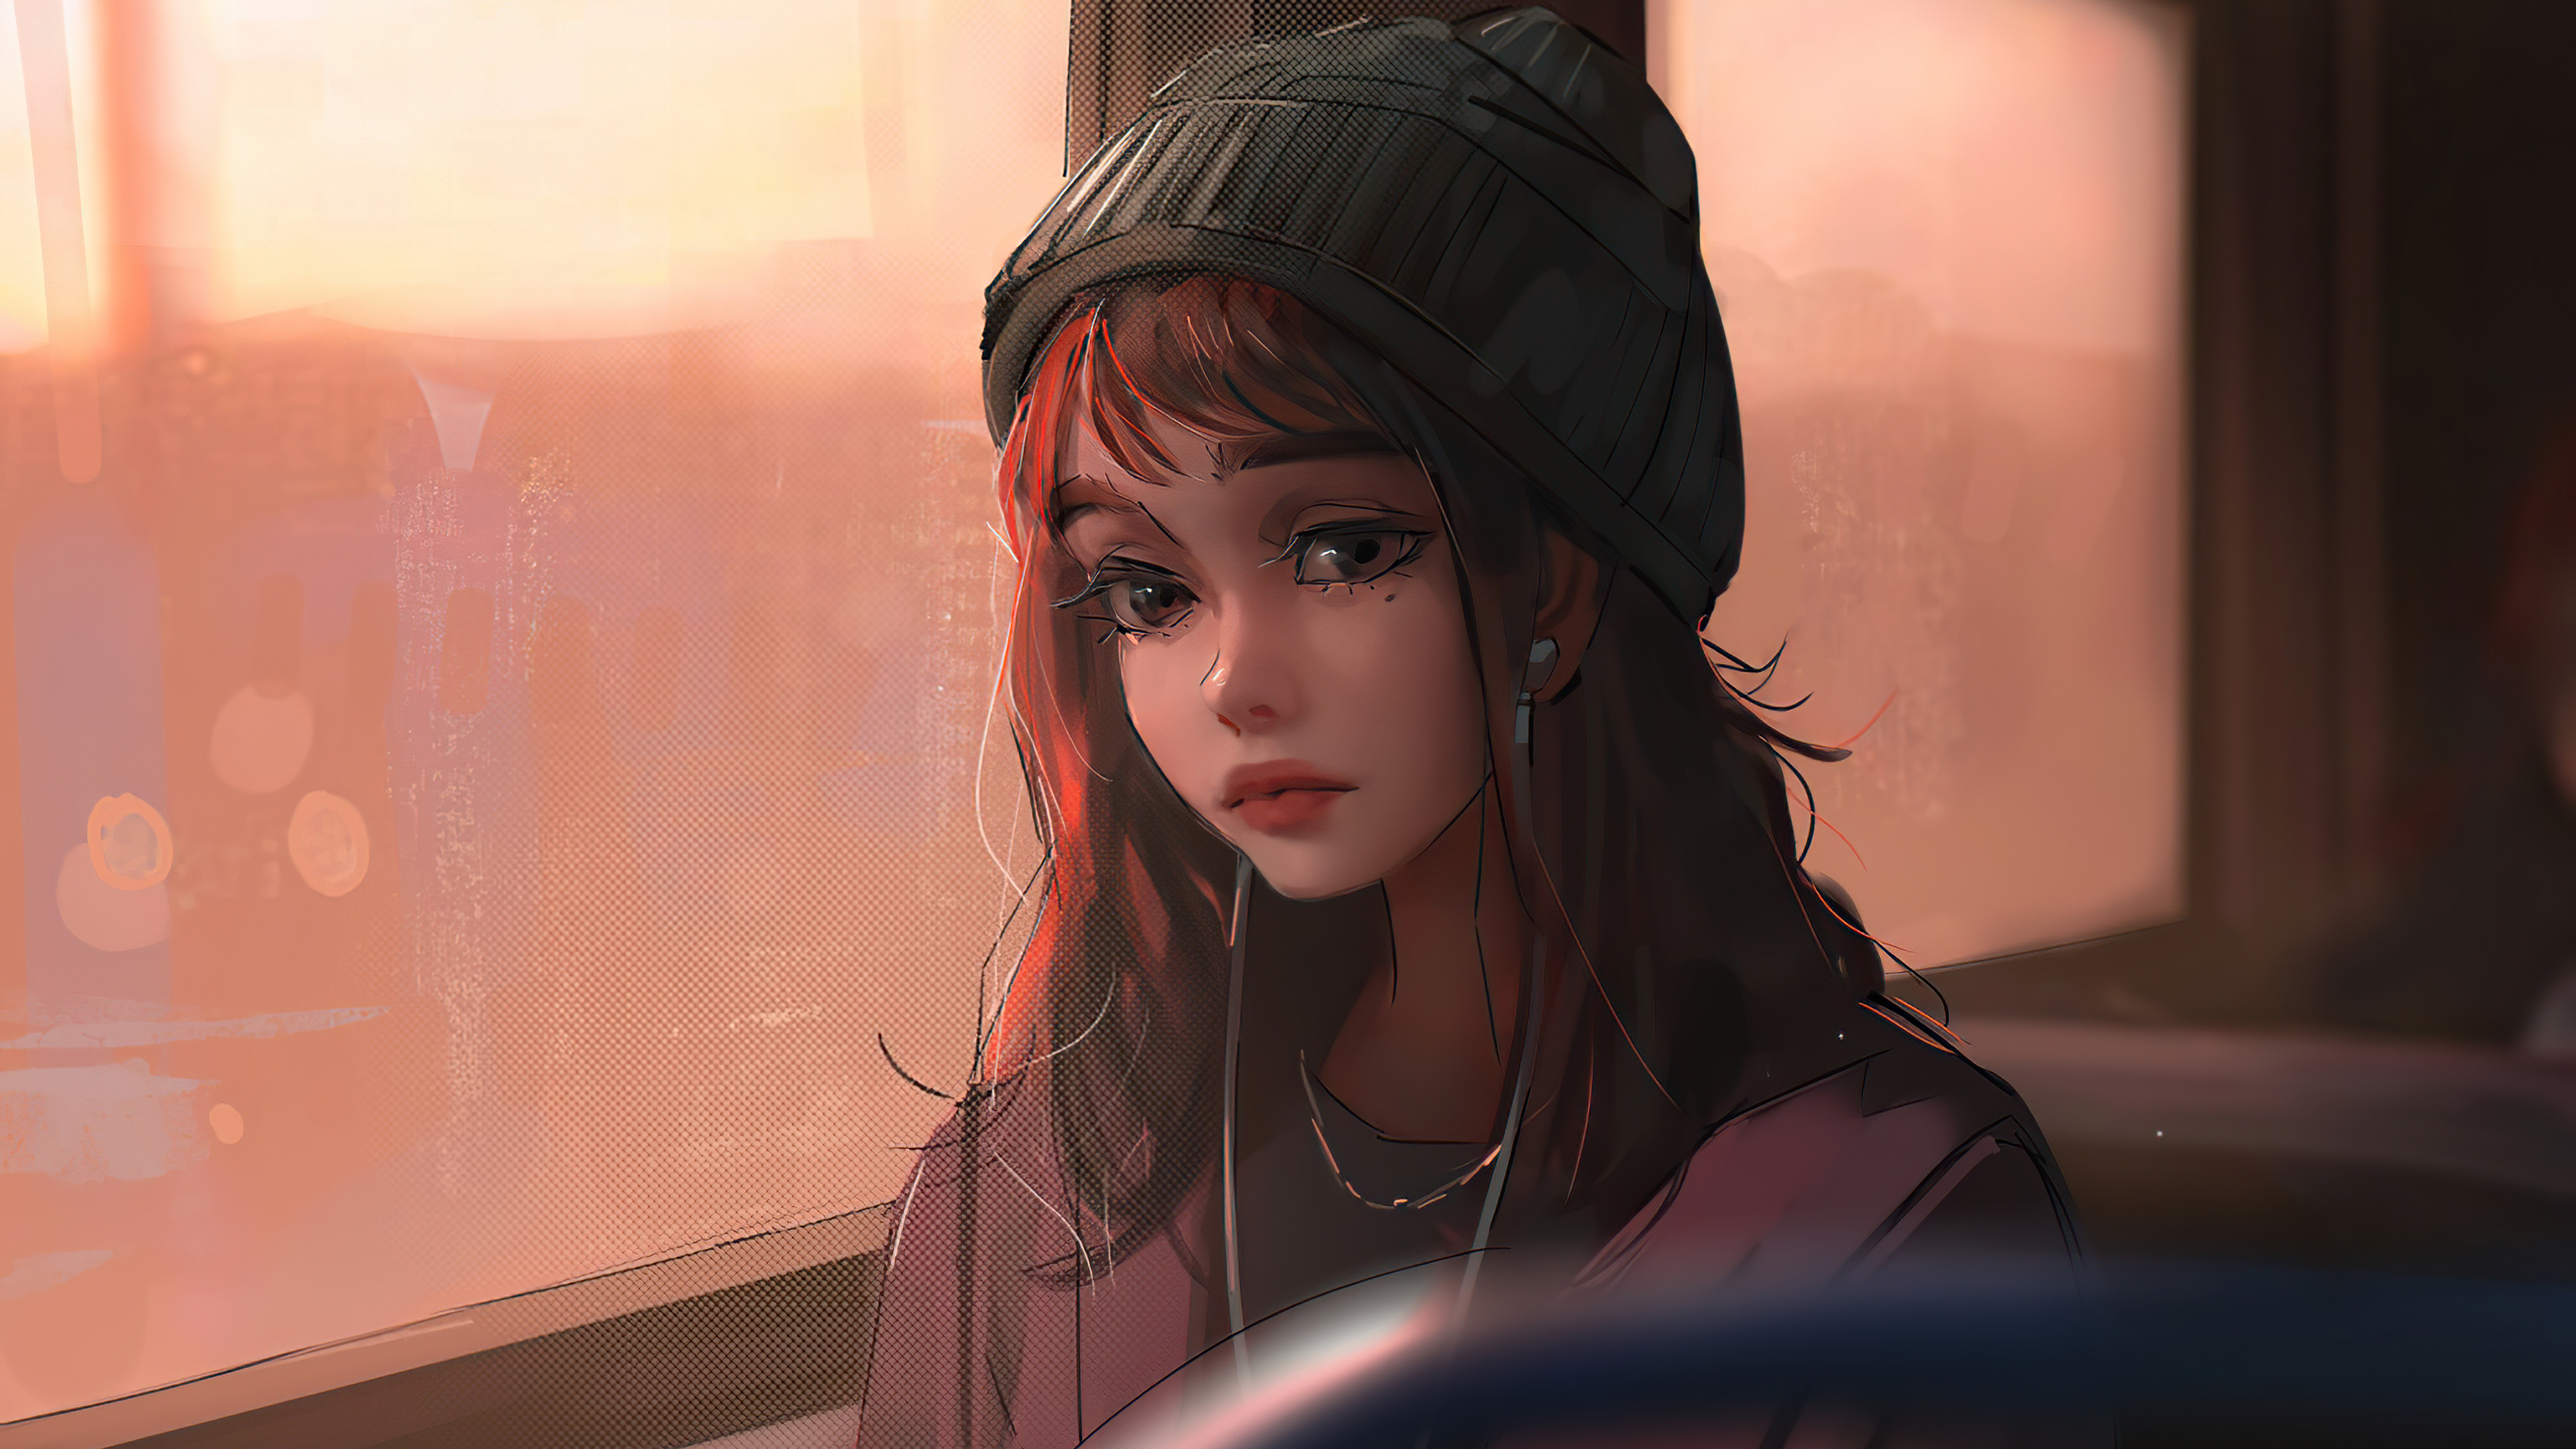 Free photo Rendering of a sad girl wearing headphones sitting by the window